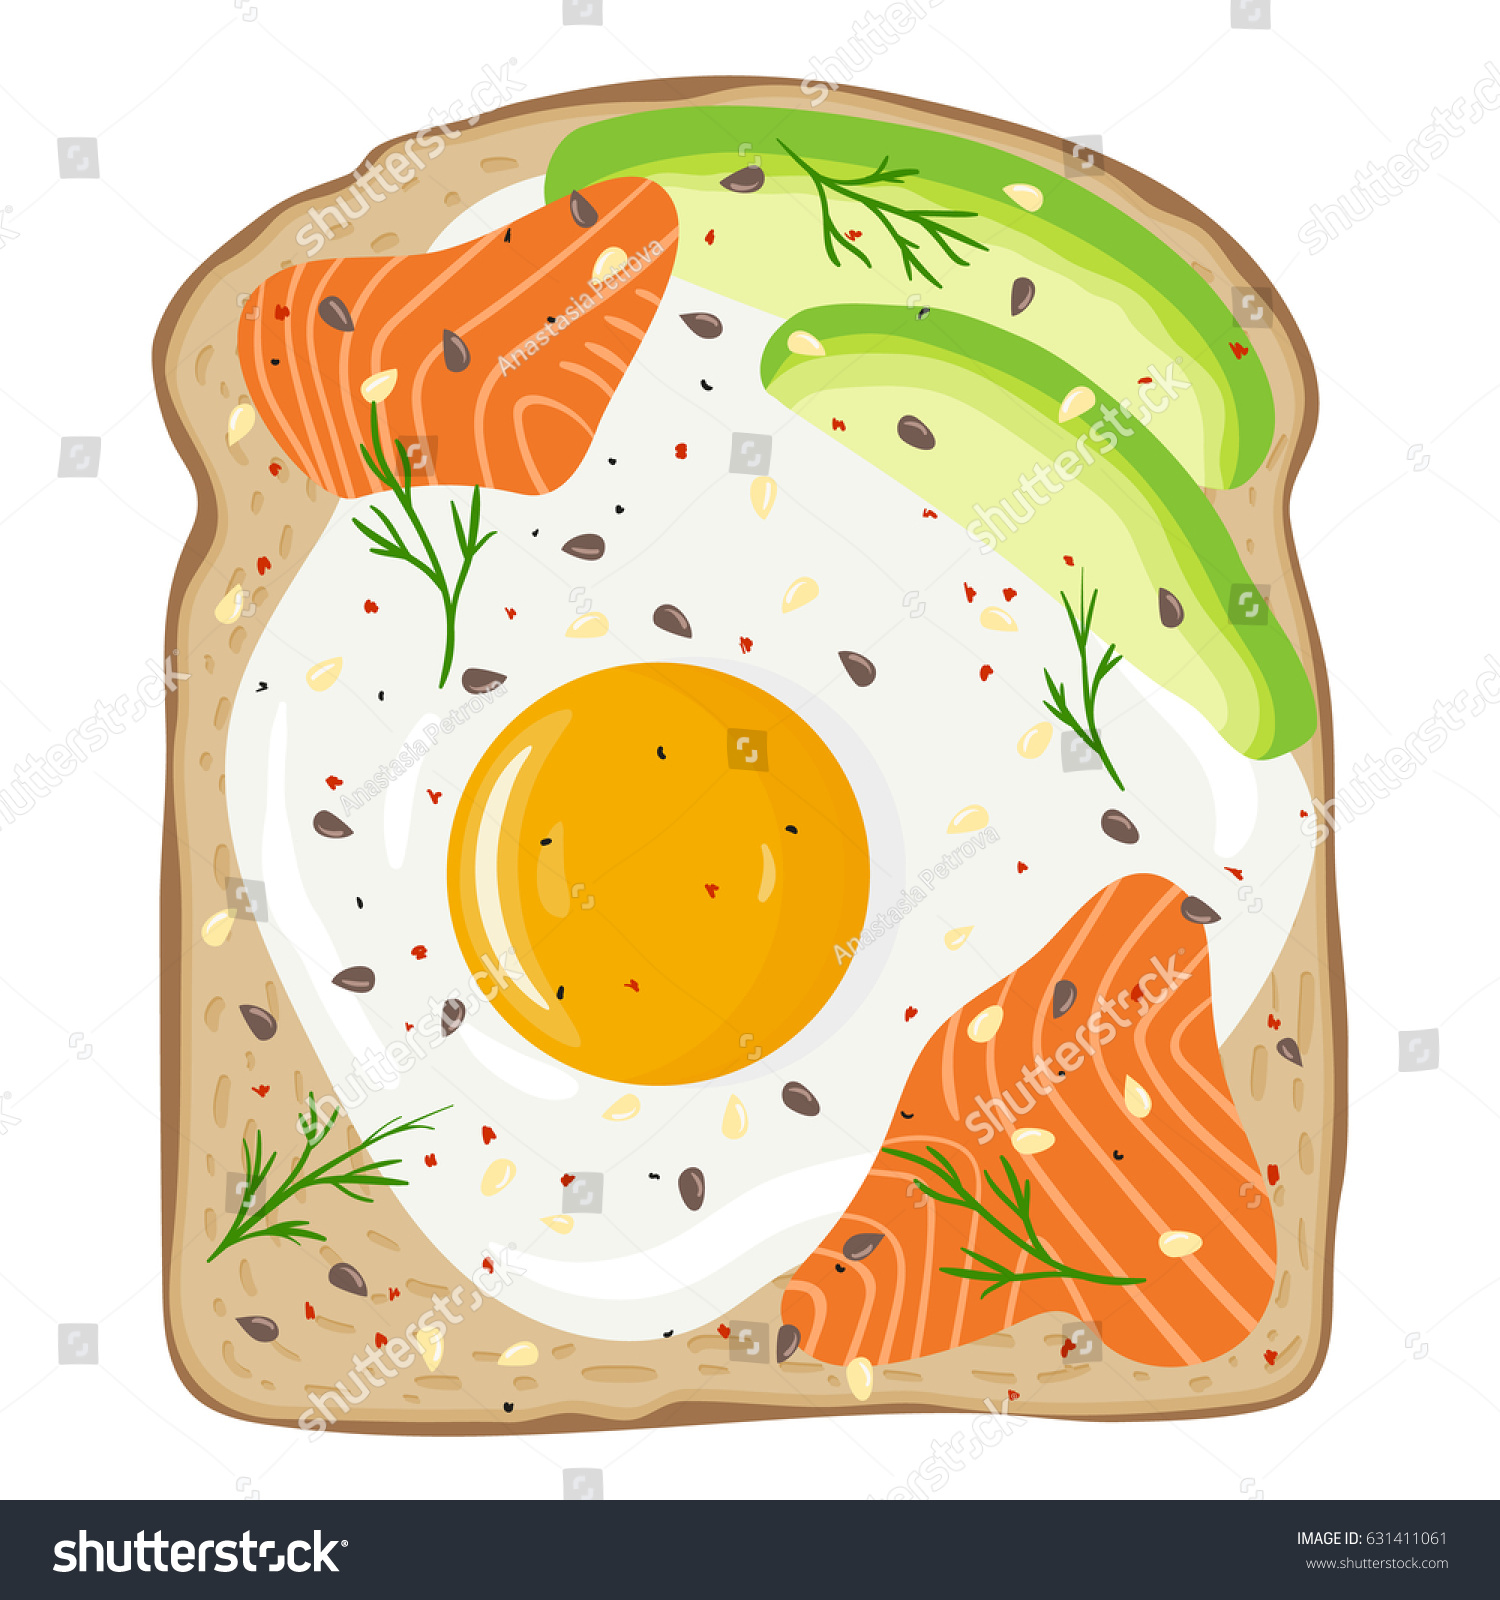 SVG of Egg, avocado and salmon toast. Delicious sandwich made of fresh toasted bread with fried egg, slices of avocado and smoked lox. Sesame seeds,seasoning and dill on top. Hand drawn vector illustration.  svg